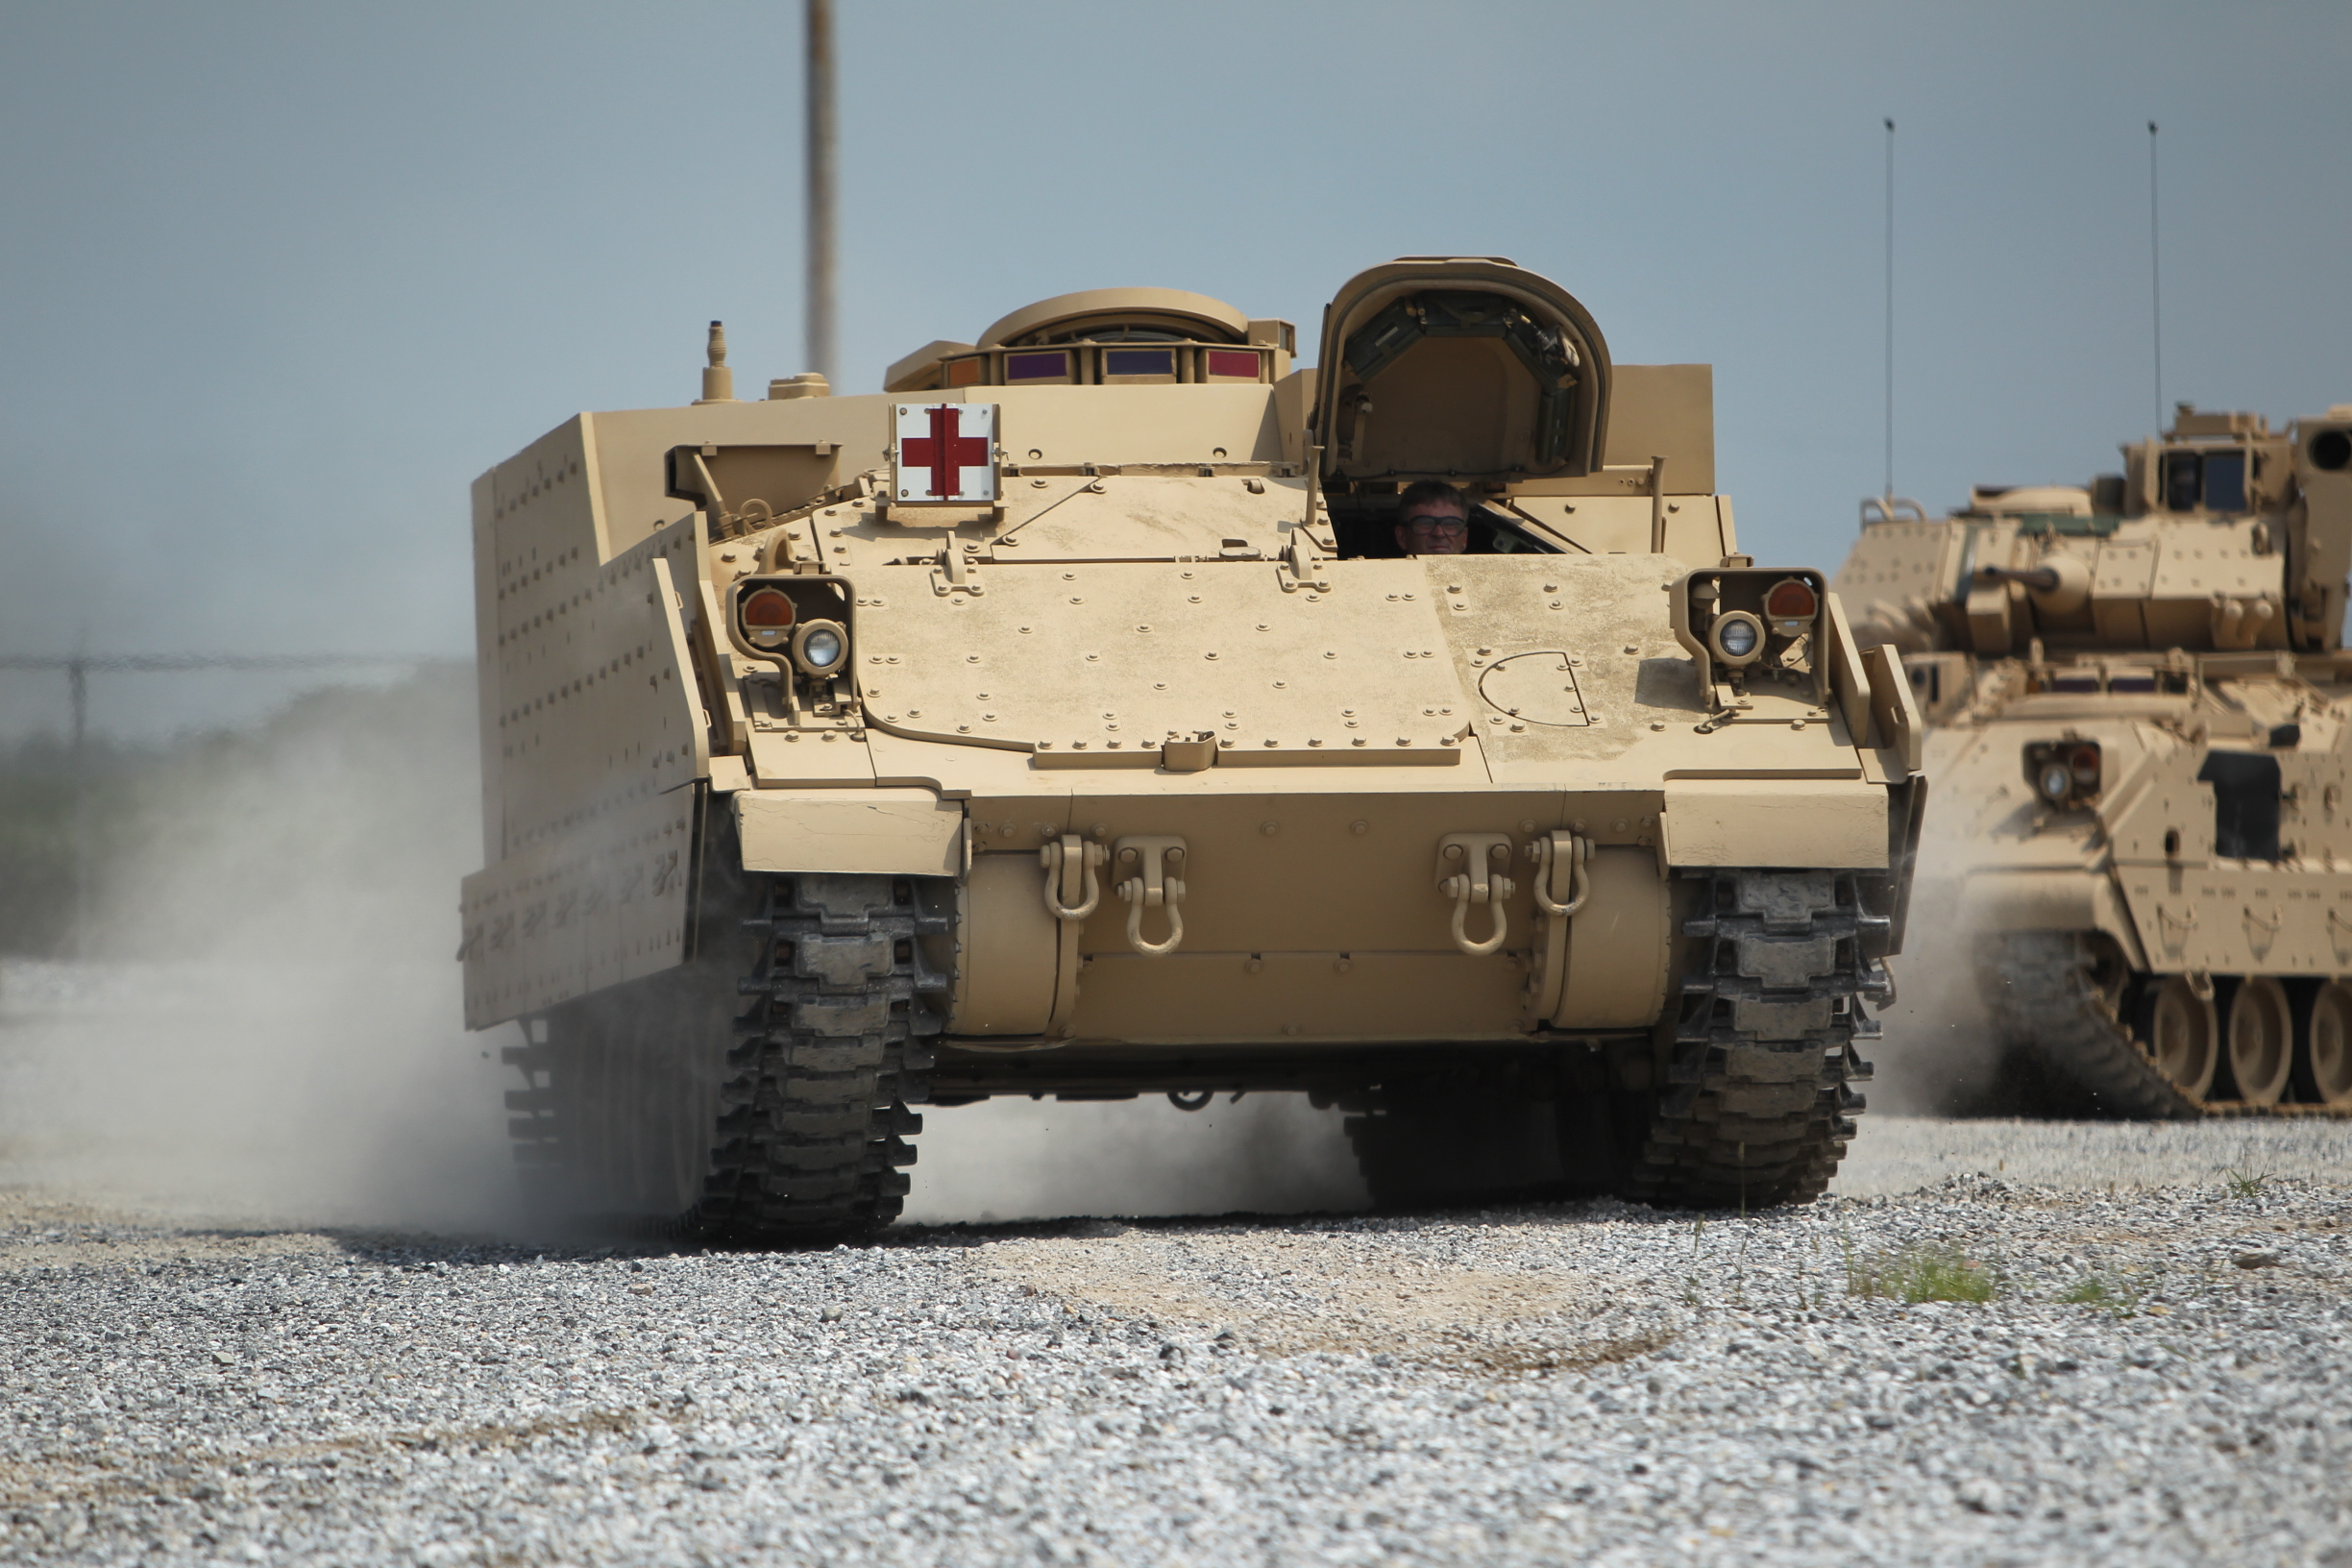 BAE Bids, General Dynamics Drops Out Of Army’s Biggest Vehicle Program, AMPV